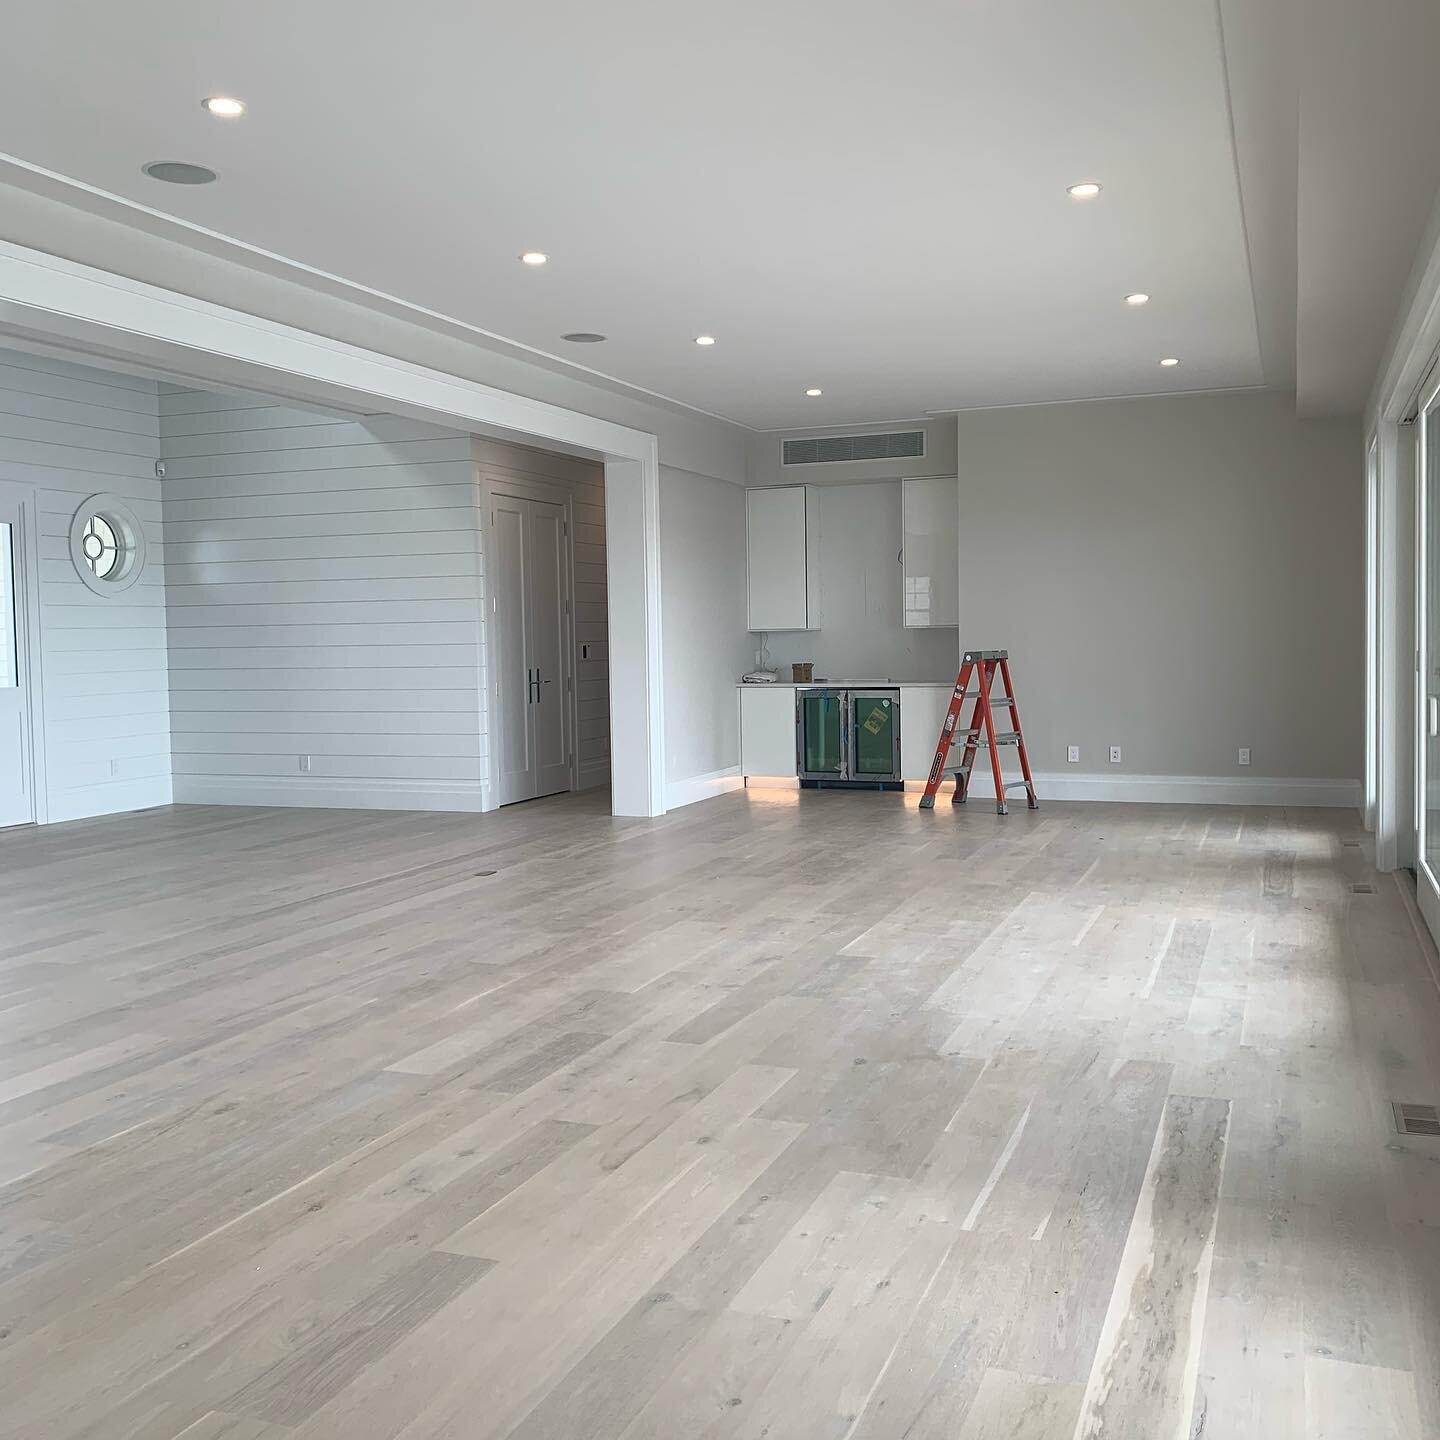 New construction interior design job in Westhampton Beach. We are making progress. I love seeing all of the finishes and lighting that I selected. Furniture is going in soon. Stay tuned!  #westhamptonbeachinteriordesign #styledandsold #r2qconstructio